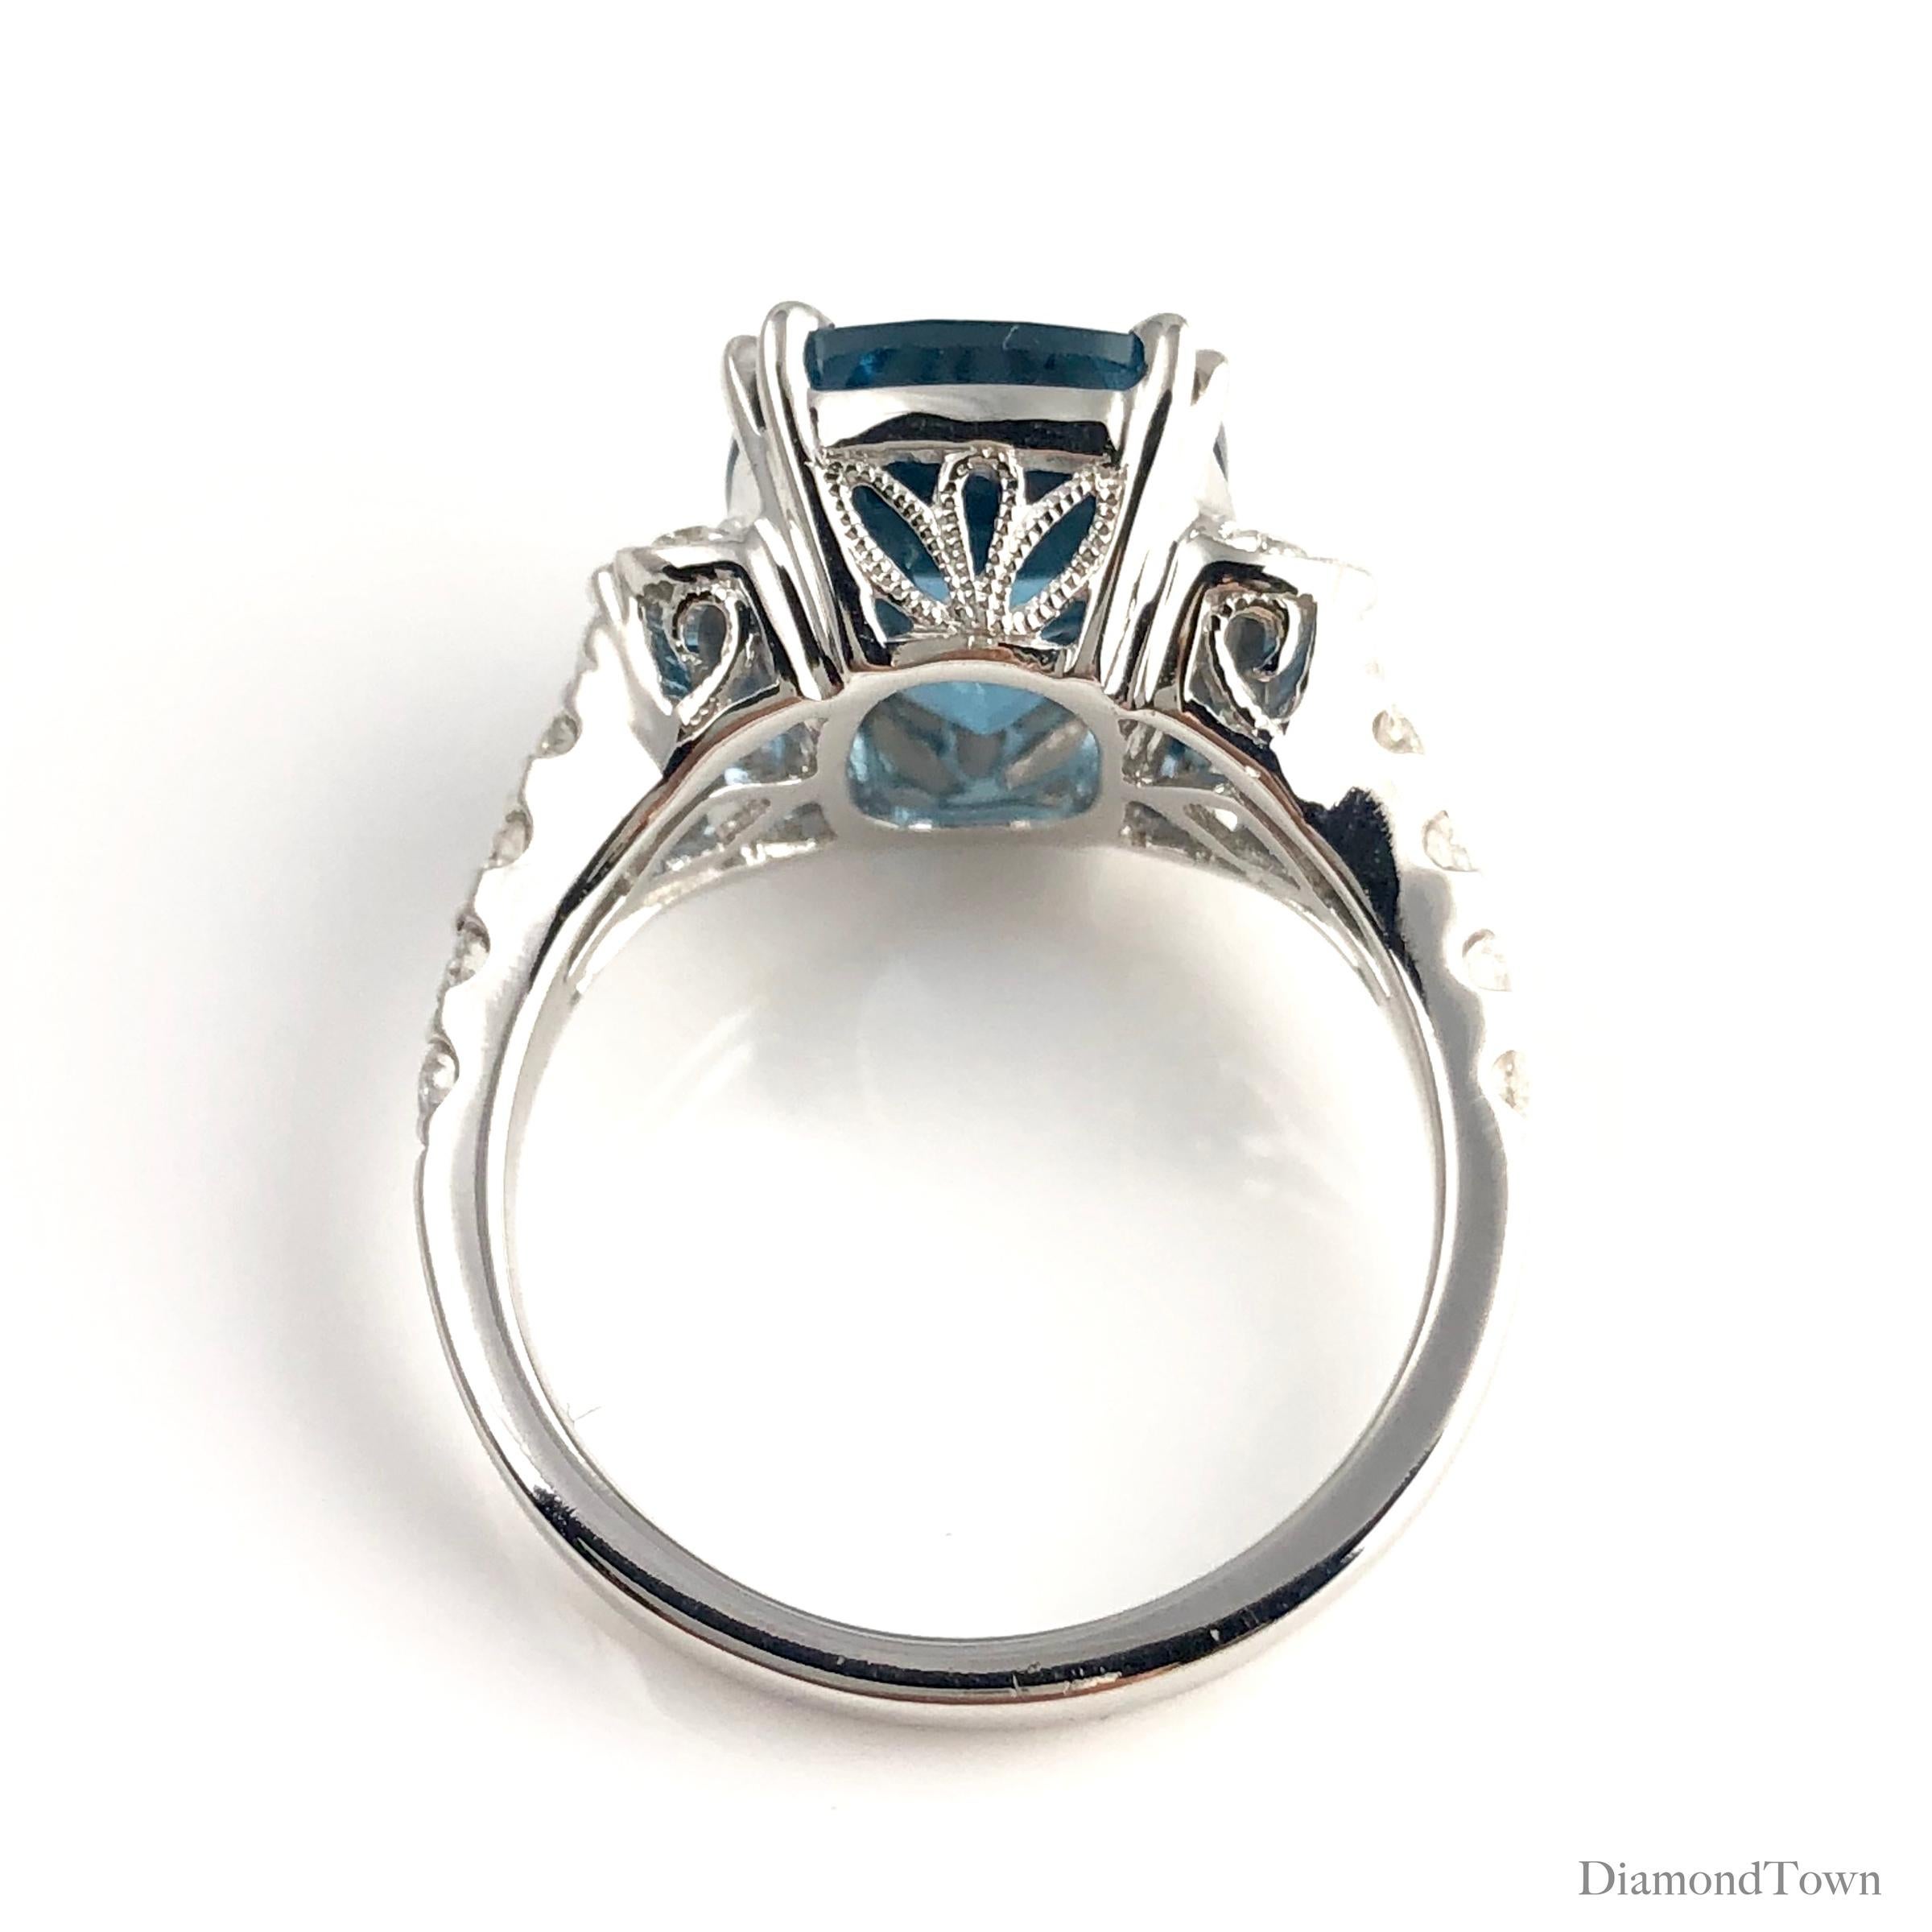 This gorgeous ring features a 5.79 carat cushion cut London Blue Topaz center, flanked by marquise cut diamonds on each side, as well as graduated round diamonds extending down the side shank. Intricate milgrain work makes this ring shine from all